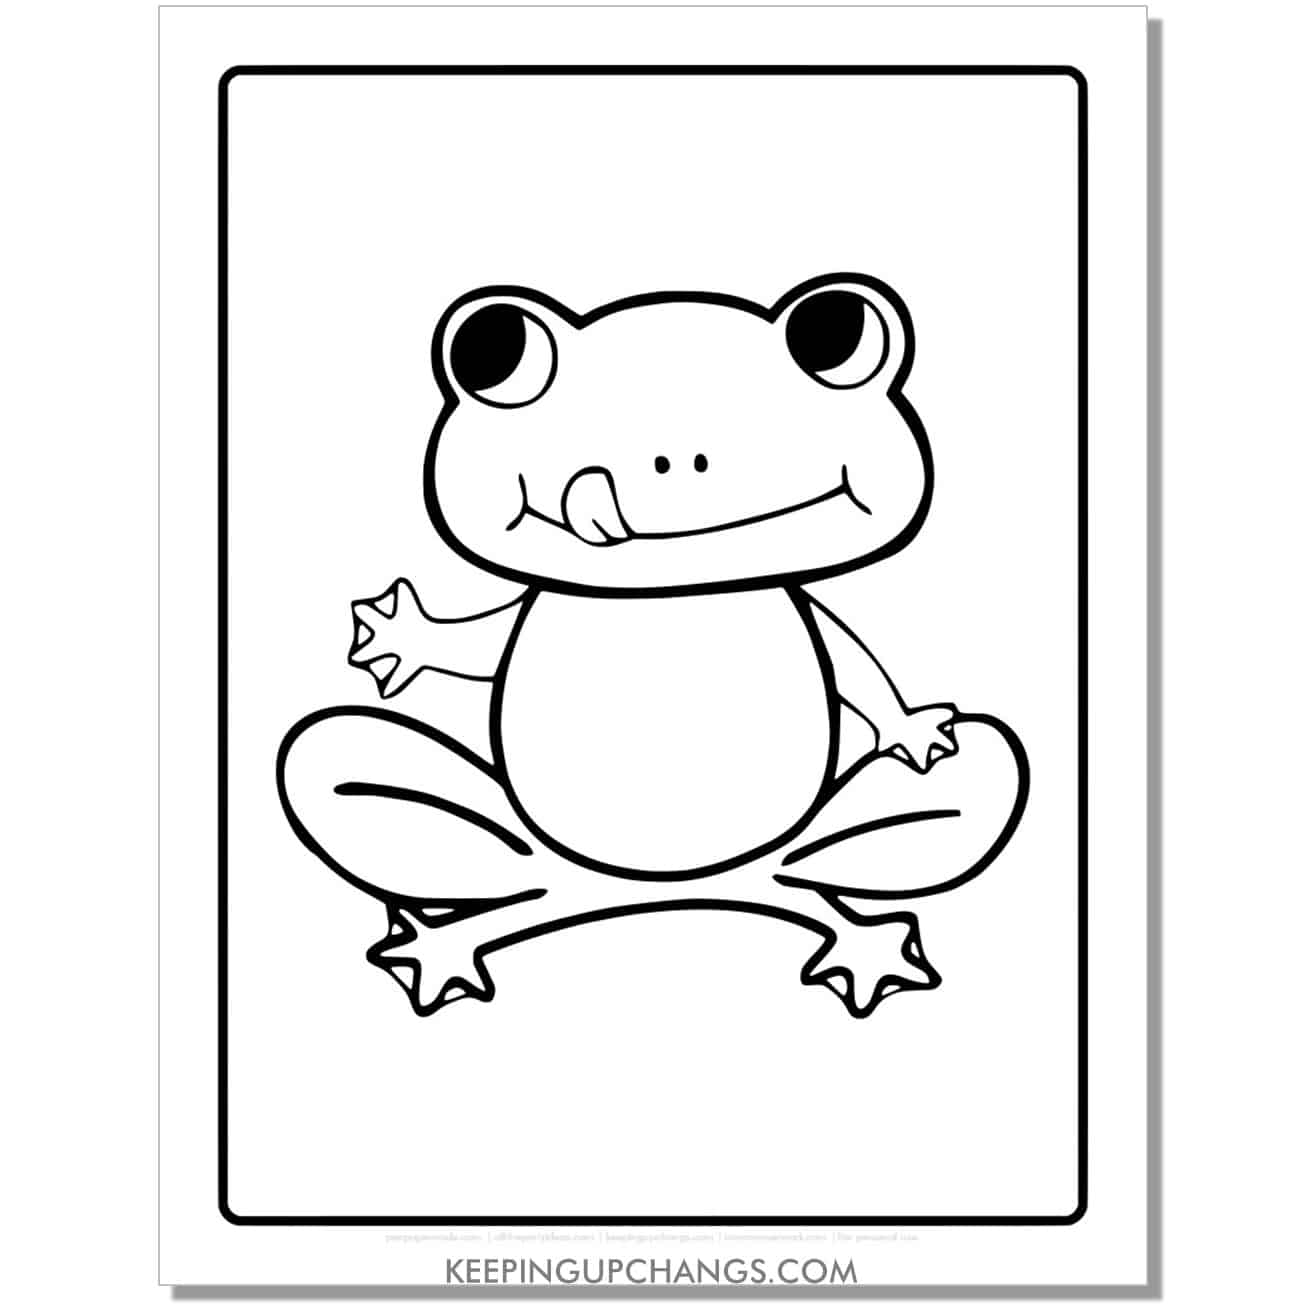 free adorable frog coloring page, sheet licking lips.